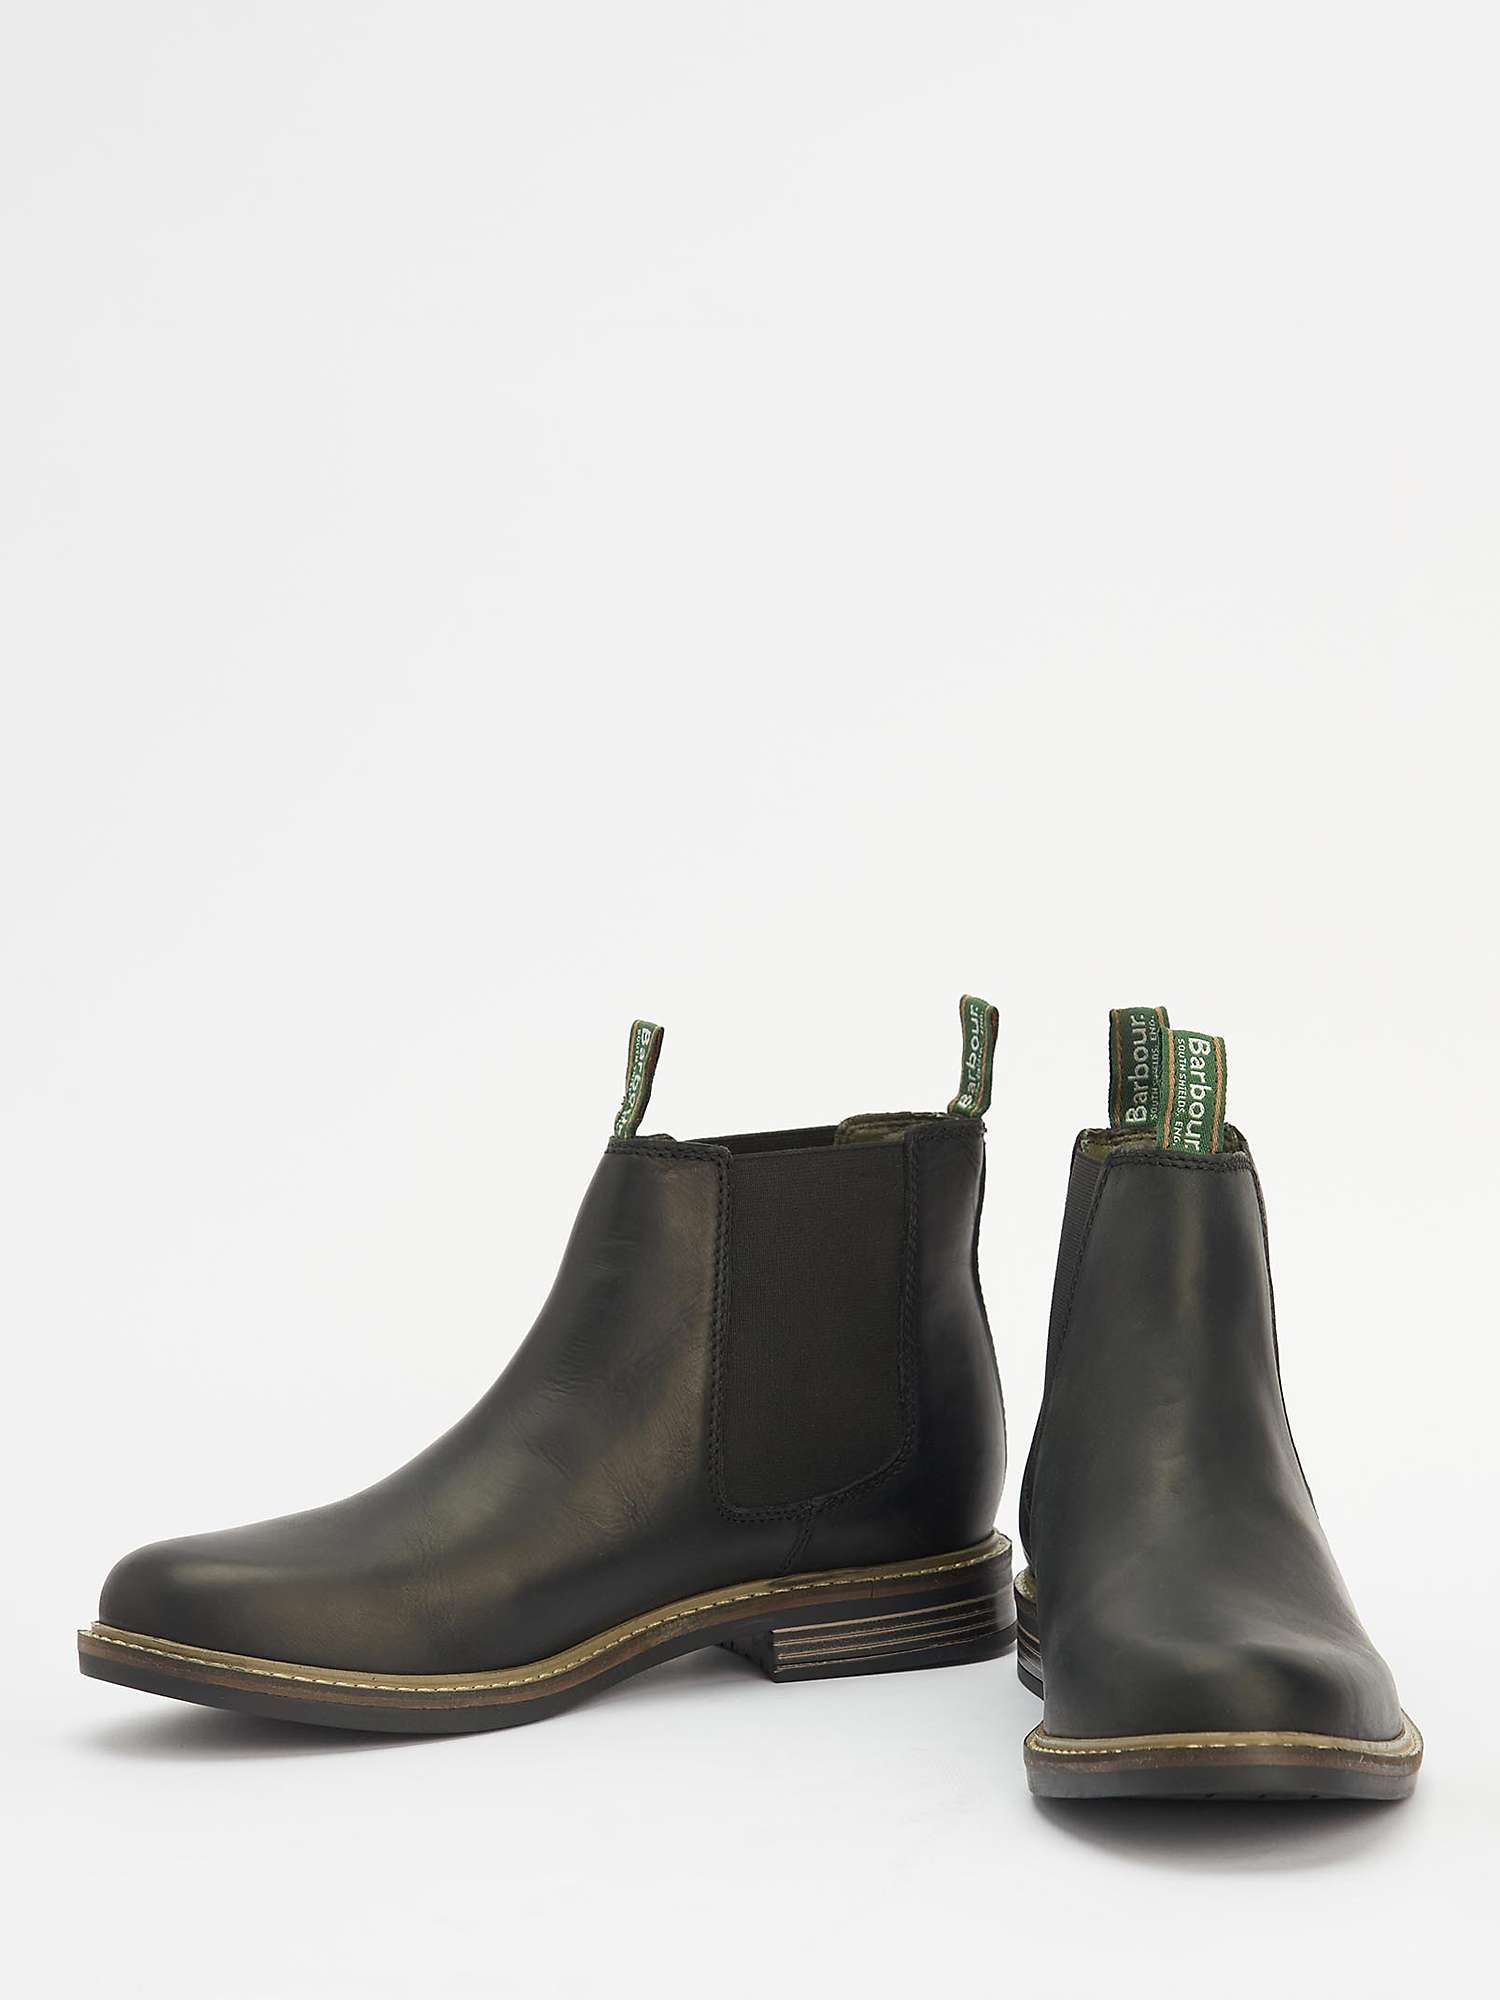 Buy Barbour Farsley Slip On Boots Online at johnlewis.com